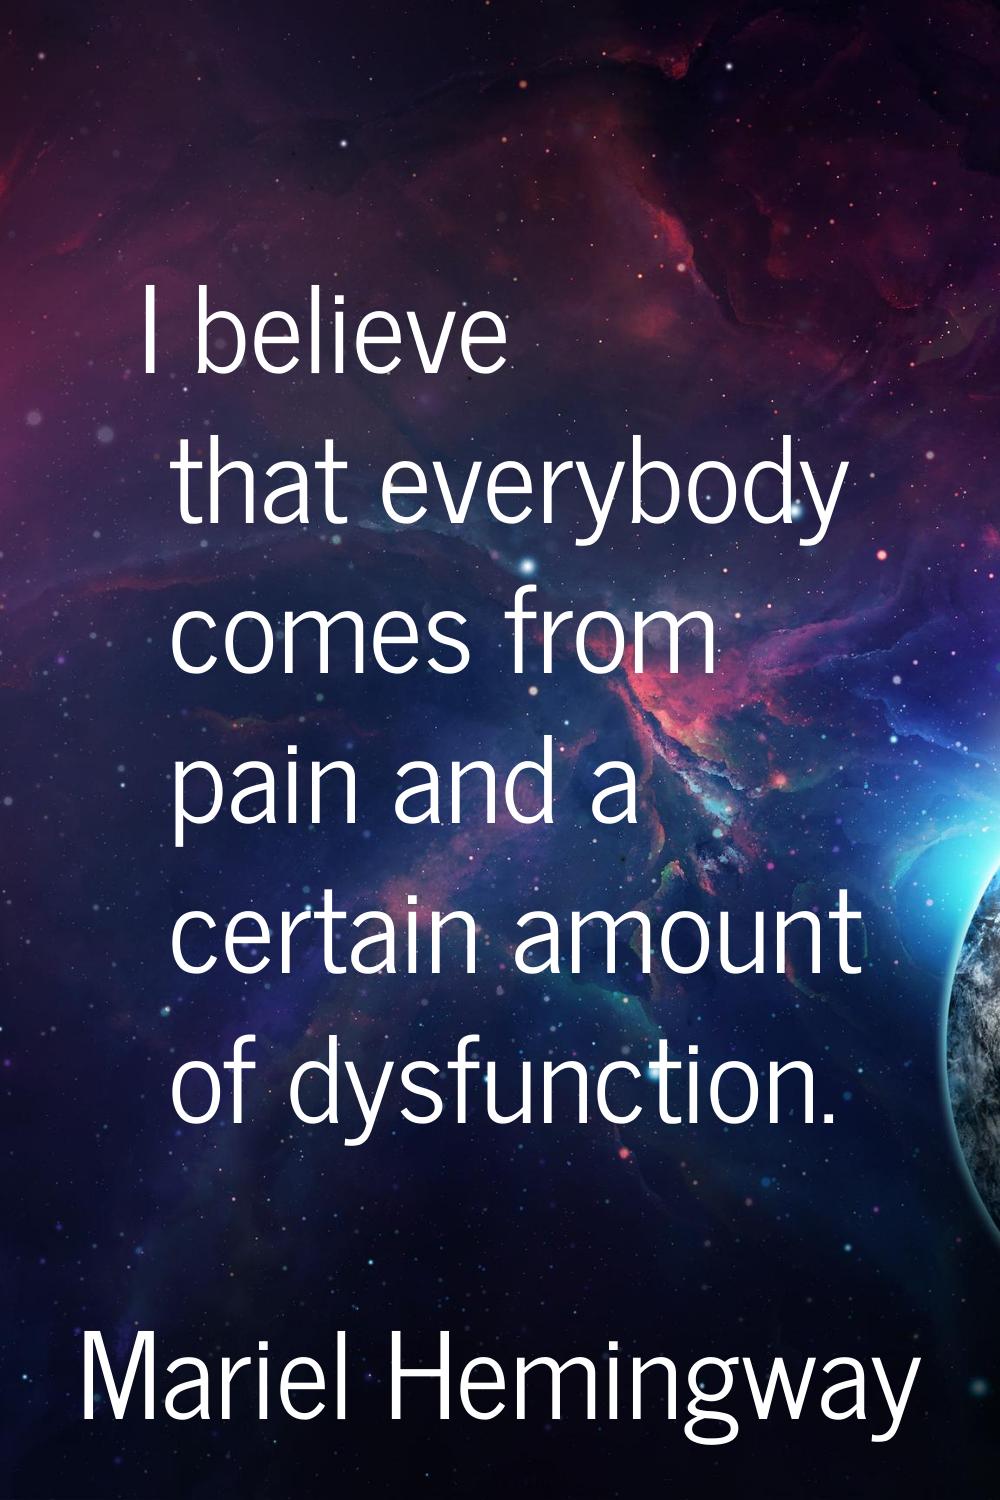 I believe that everybody comes from pain and a certain amount of dysfunction.